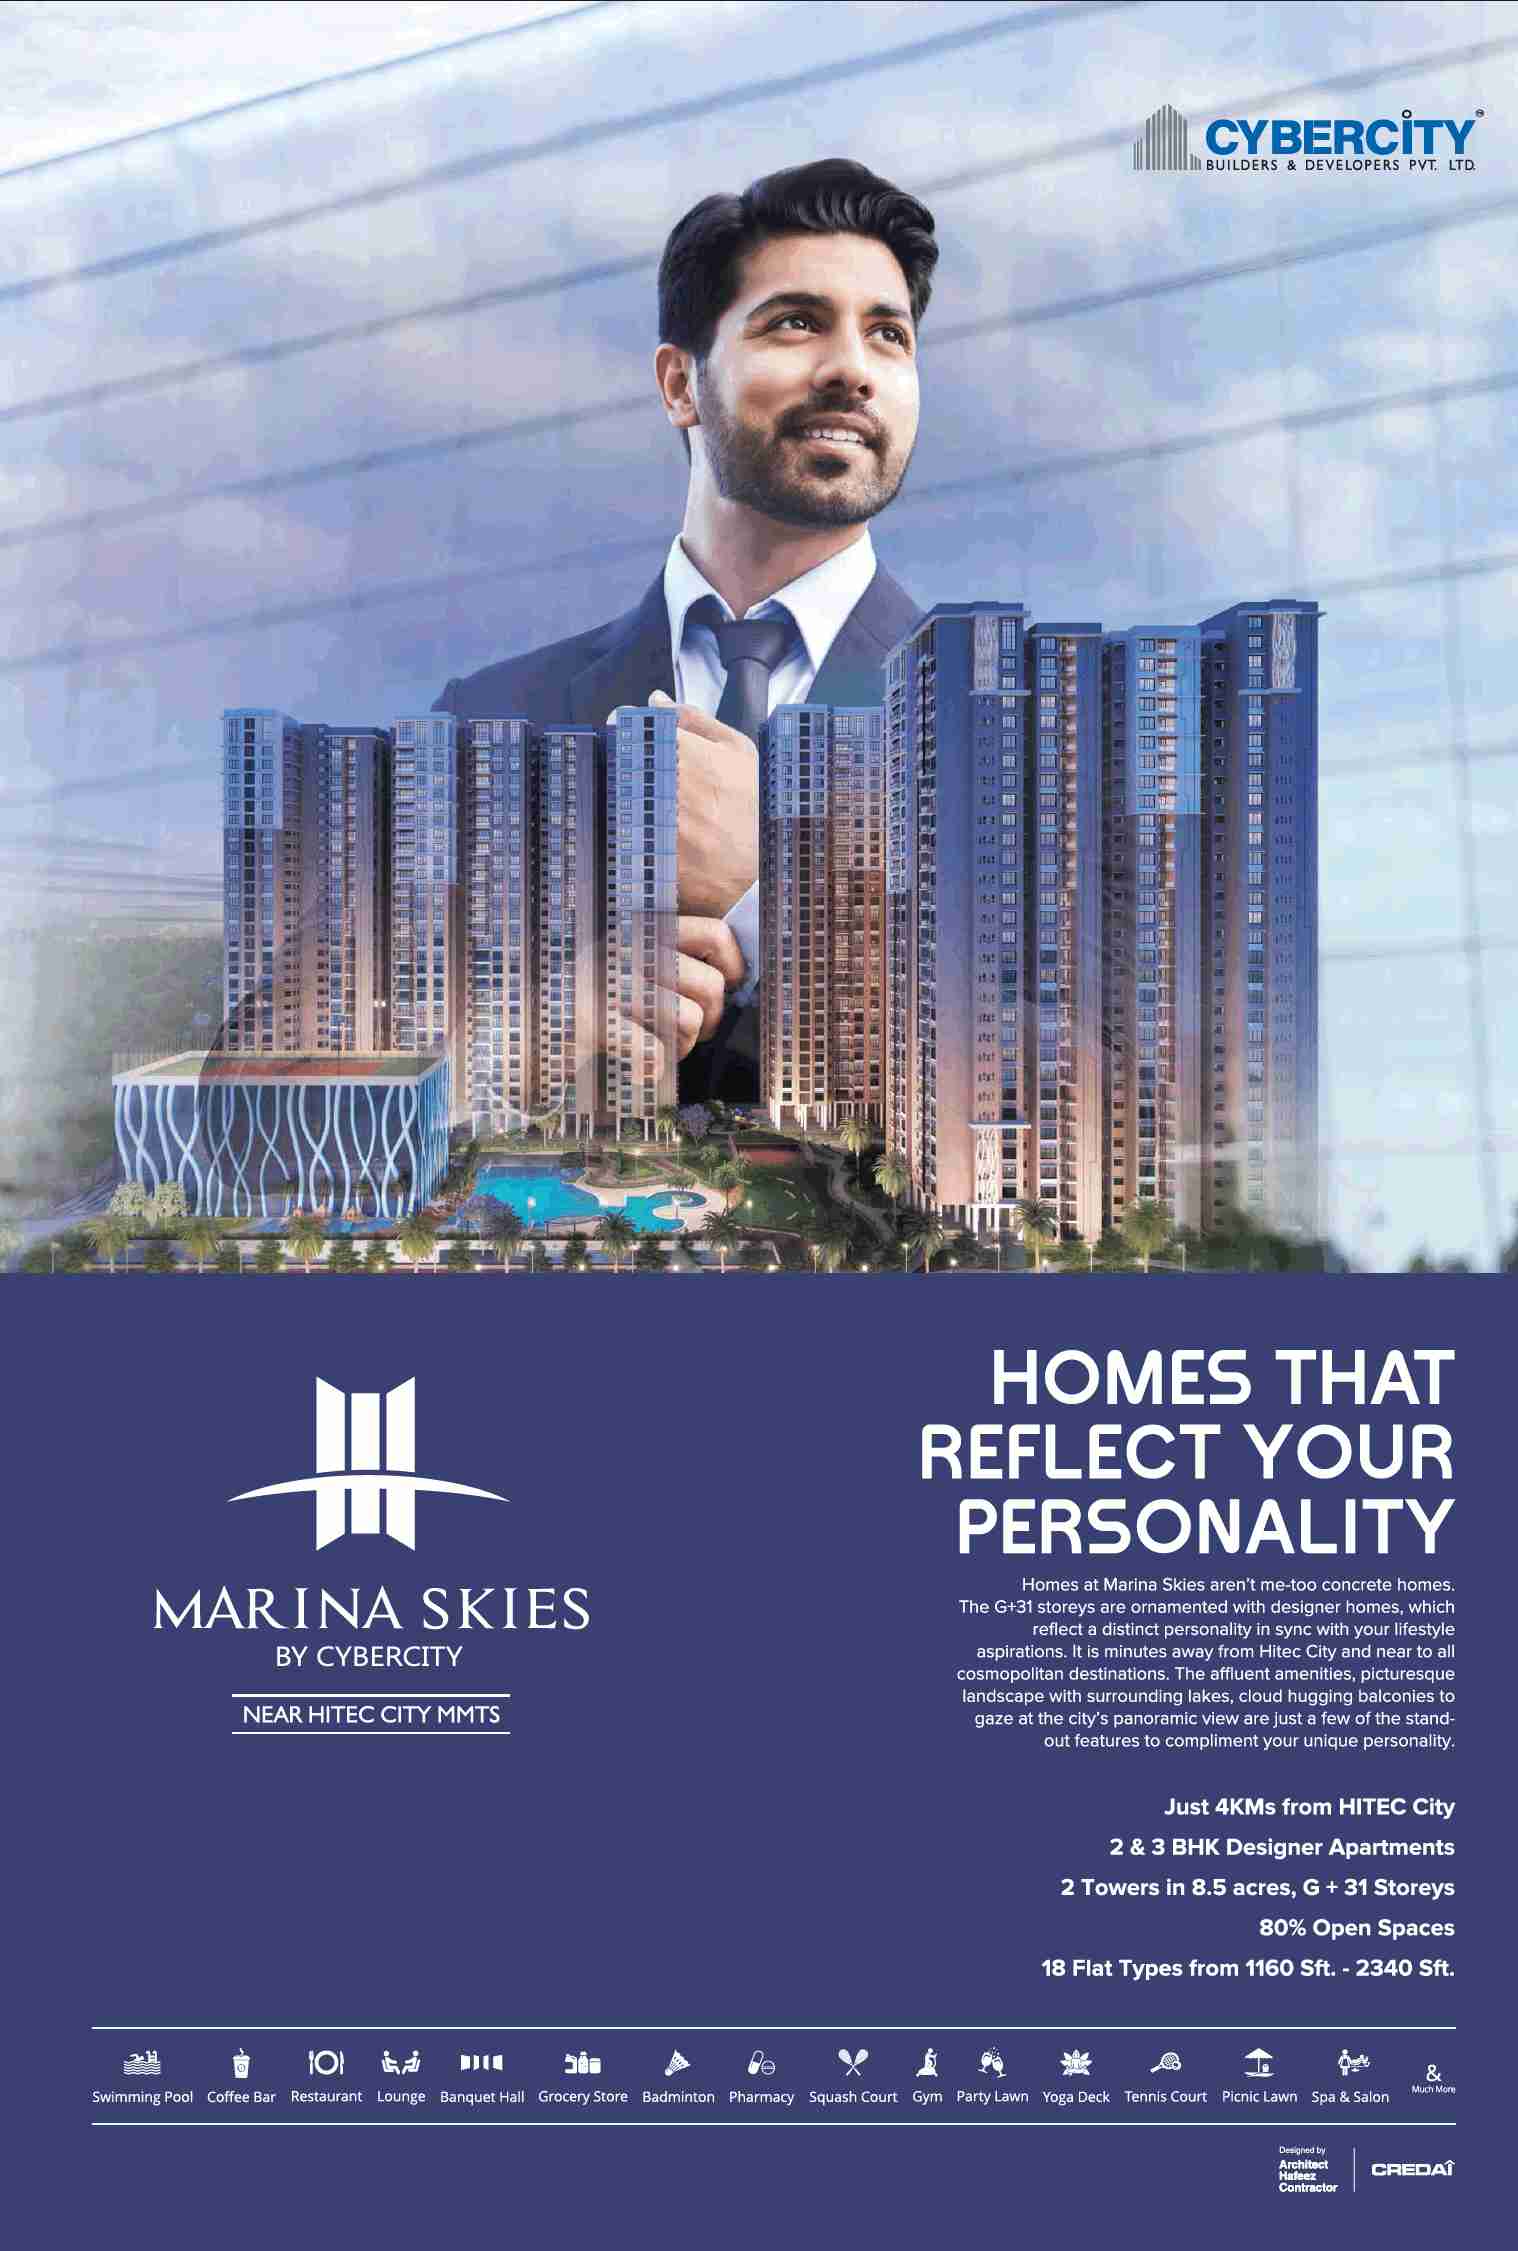 Enjoy the panoramic view of the city by residing at Cybercity Marina Skies in Hyderabad Update